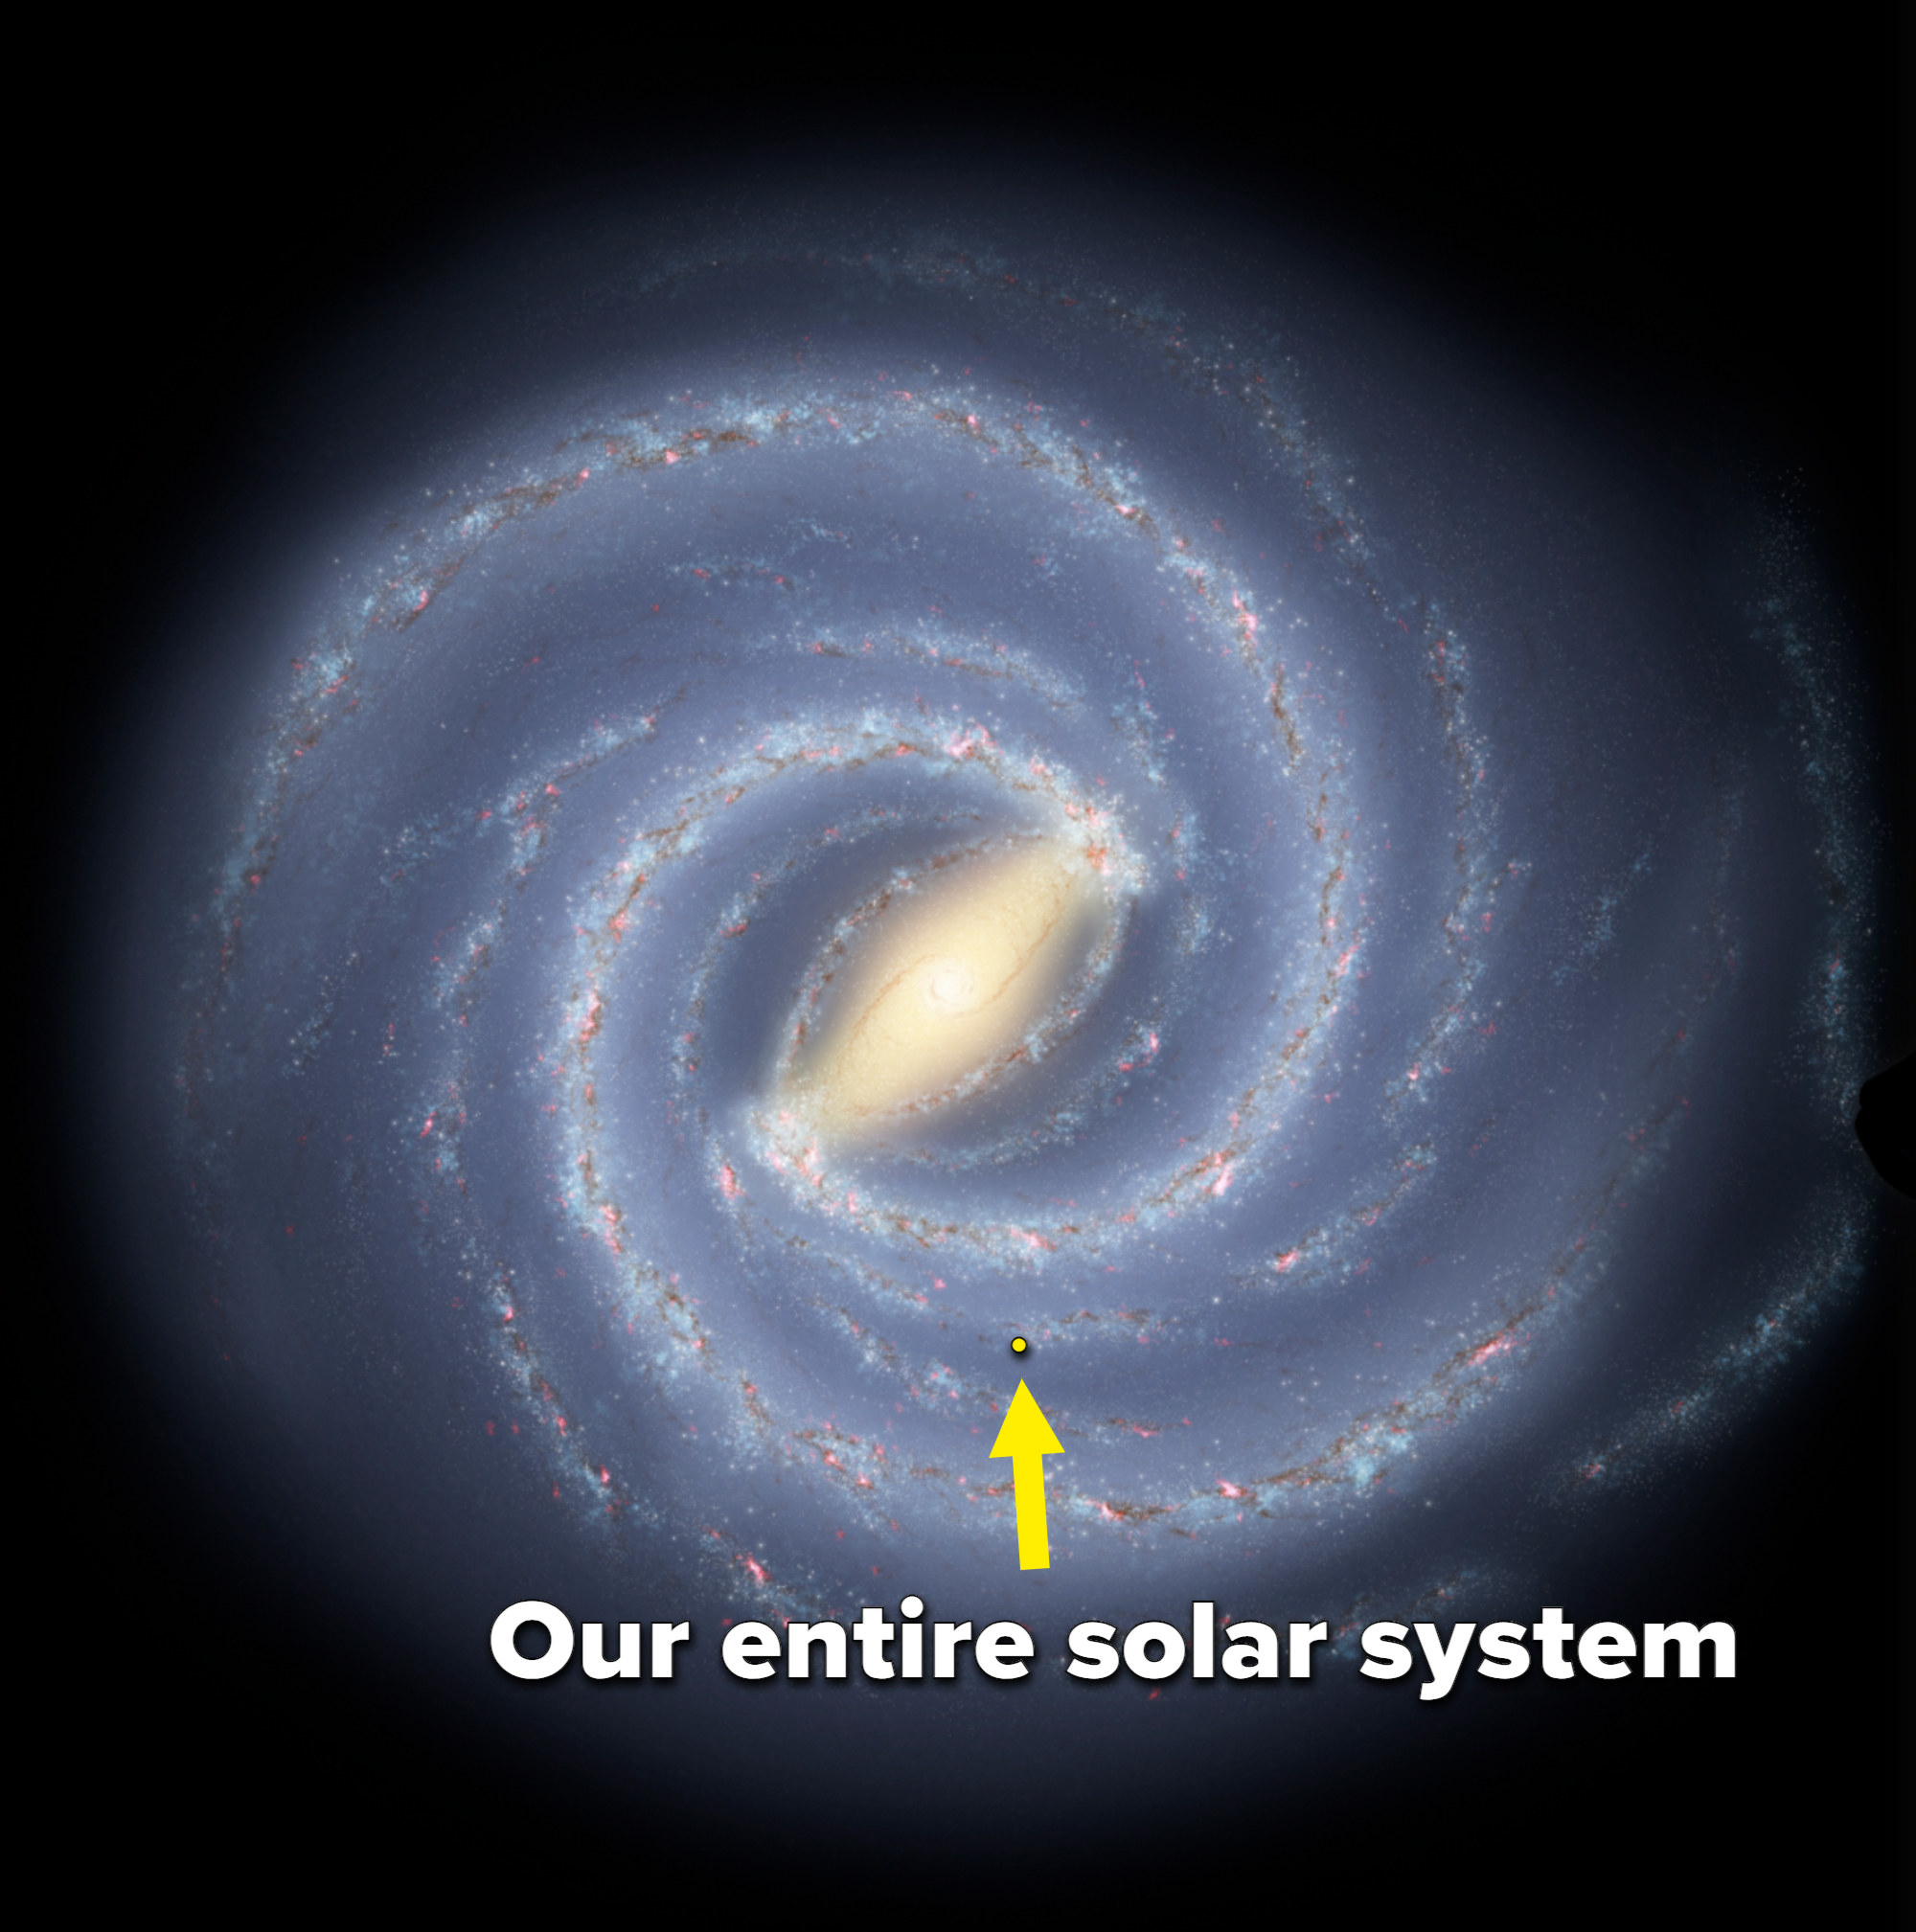 Our solar system in the Milky Way galaxy